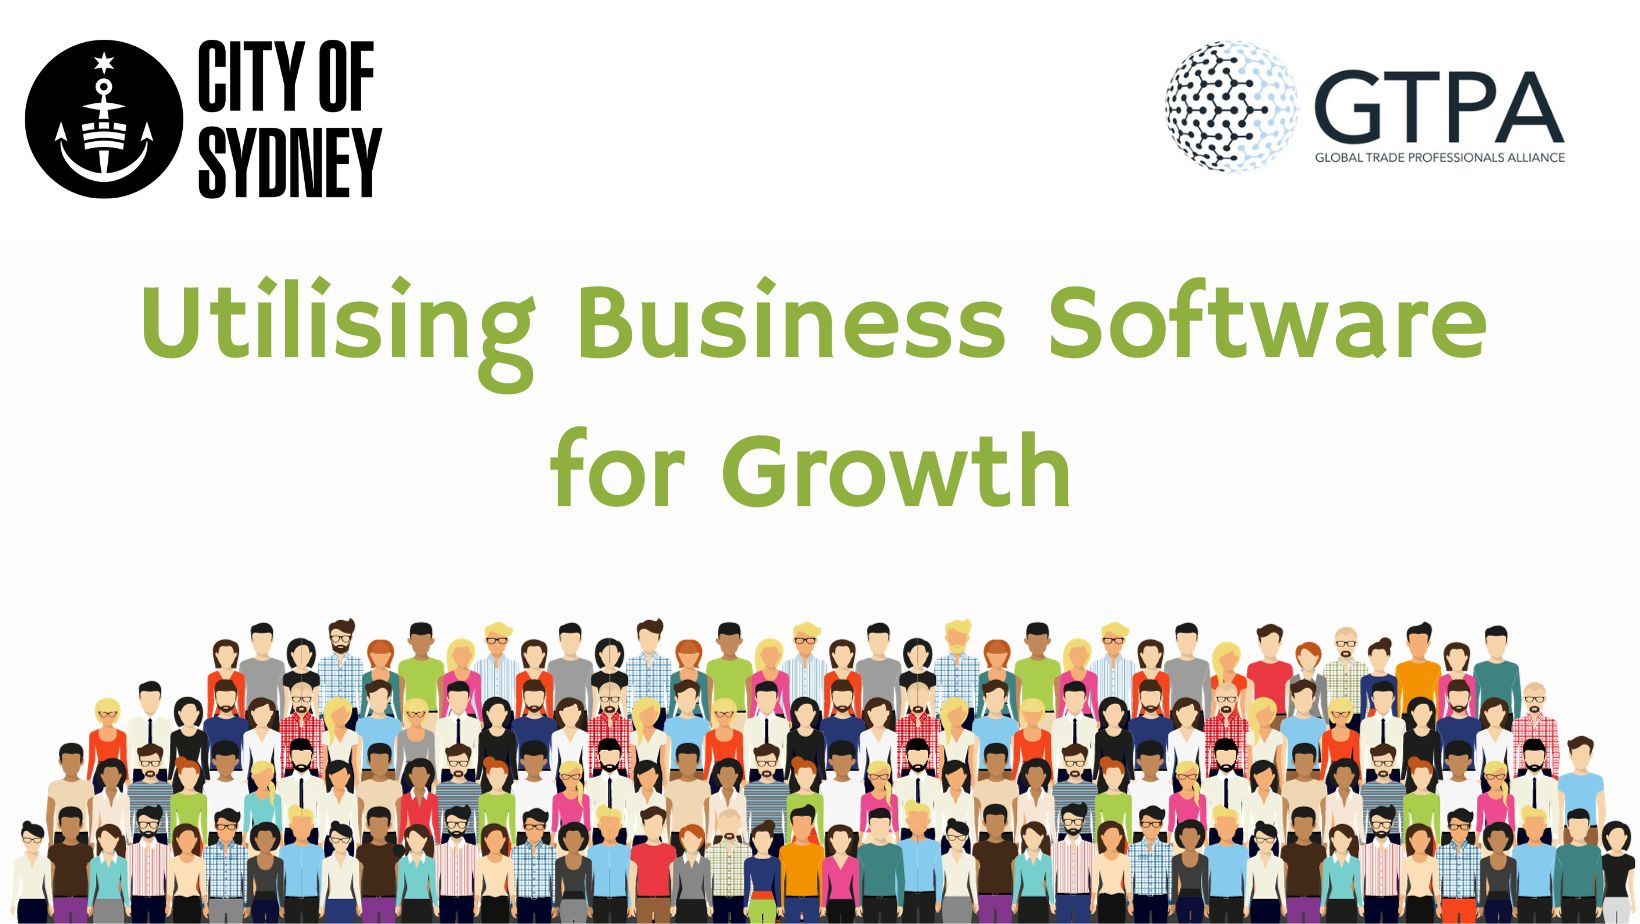 Utilising Business Software for Growth: Leverage Cutting-Edge Software to Drive Business Expansion